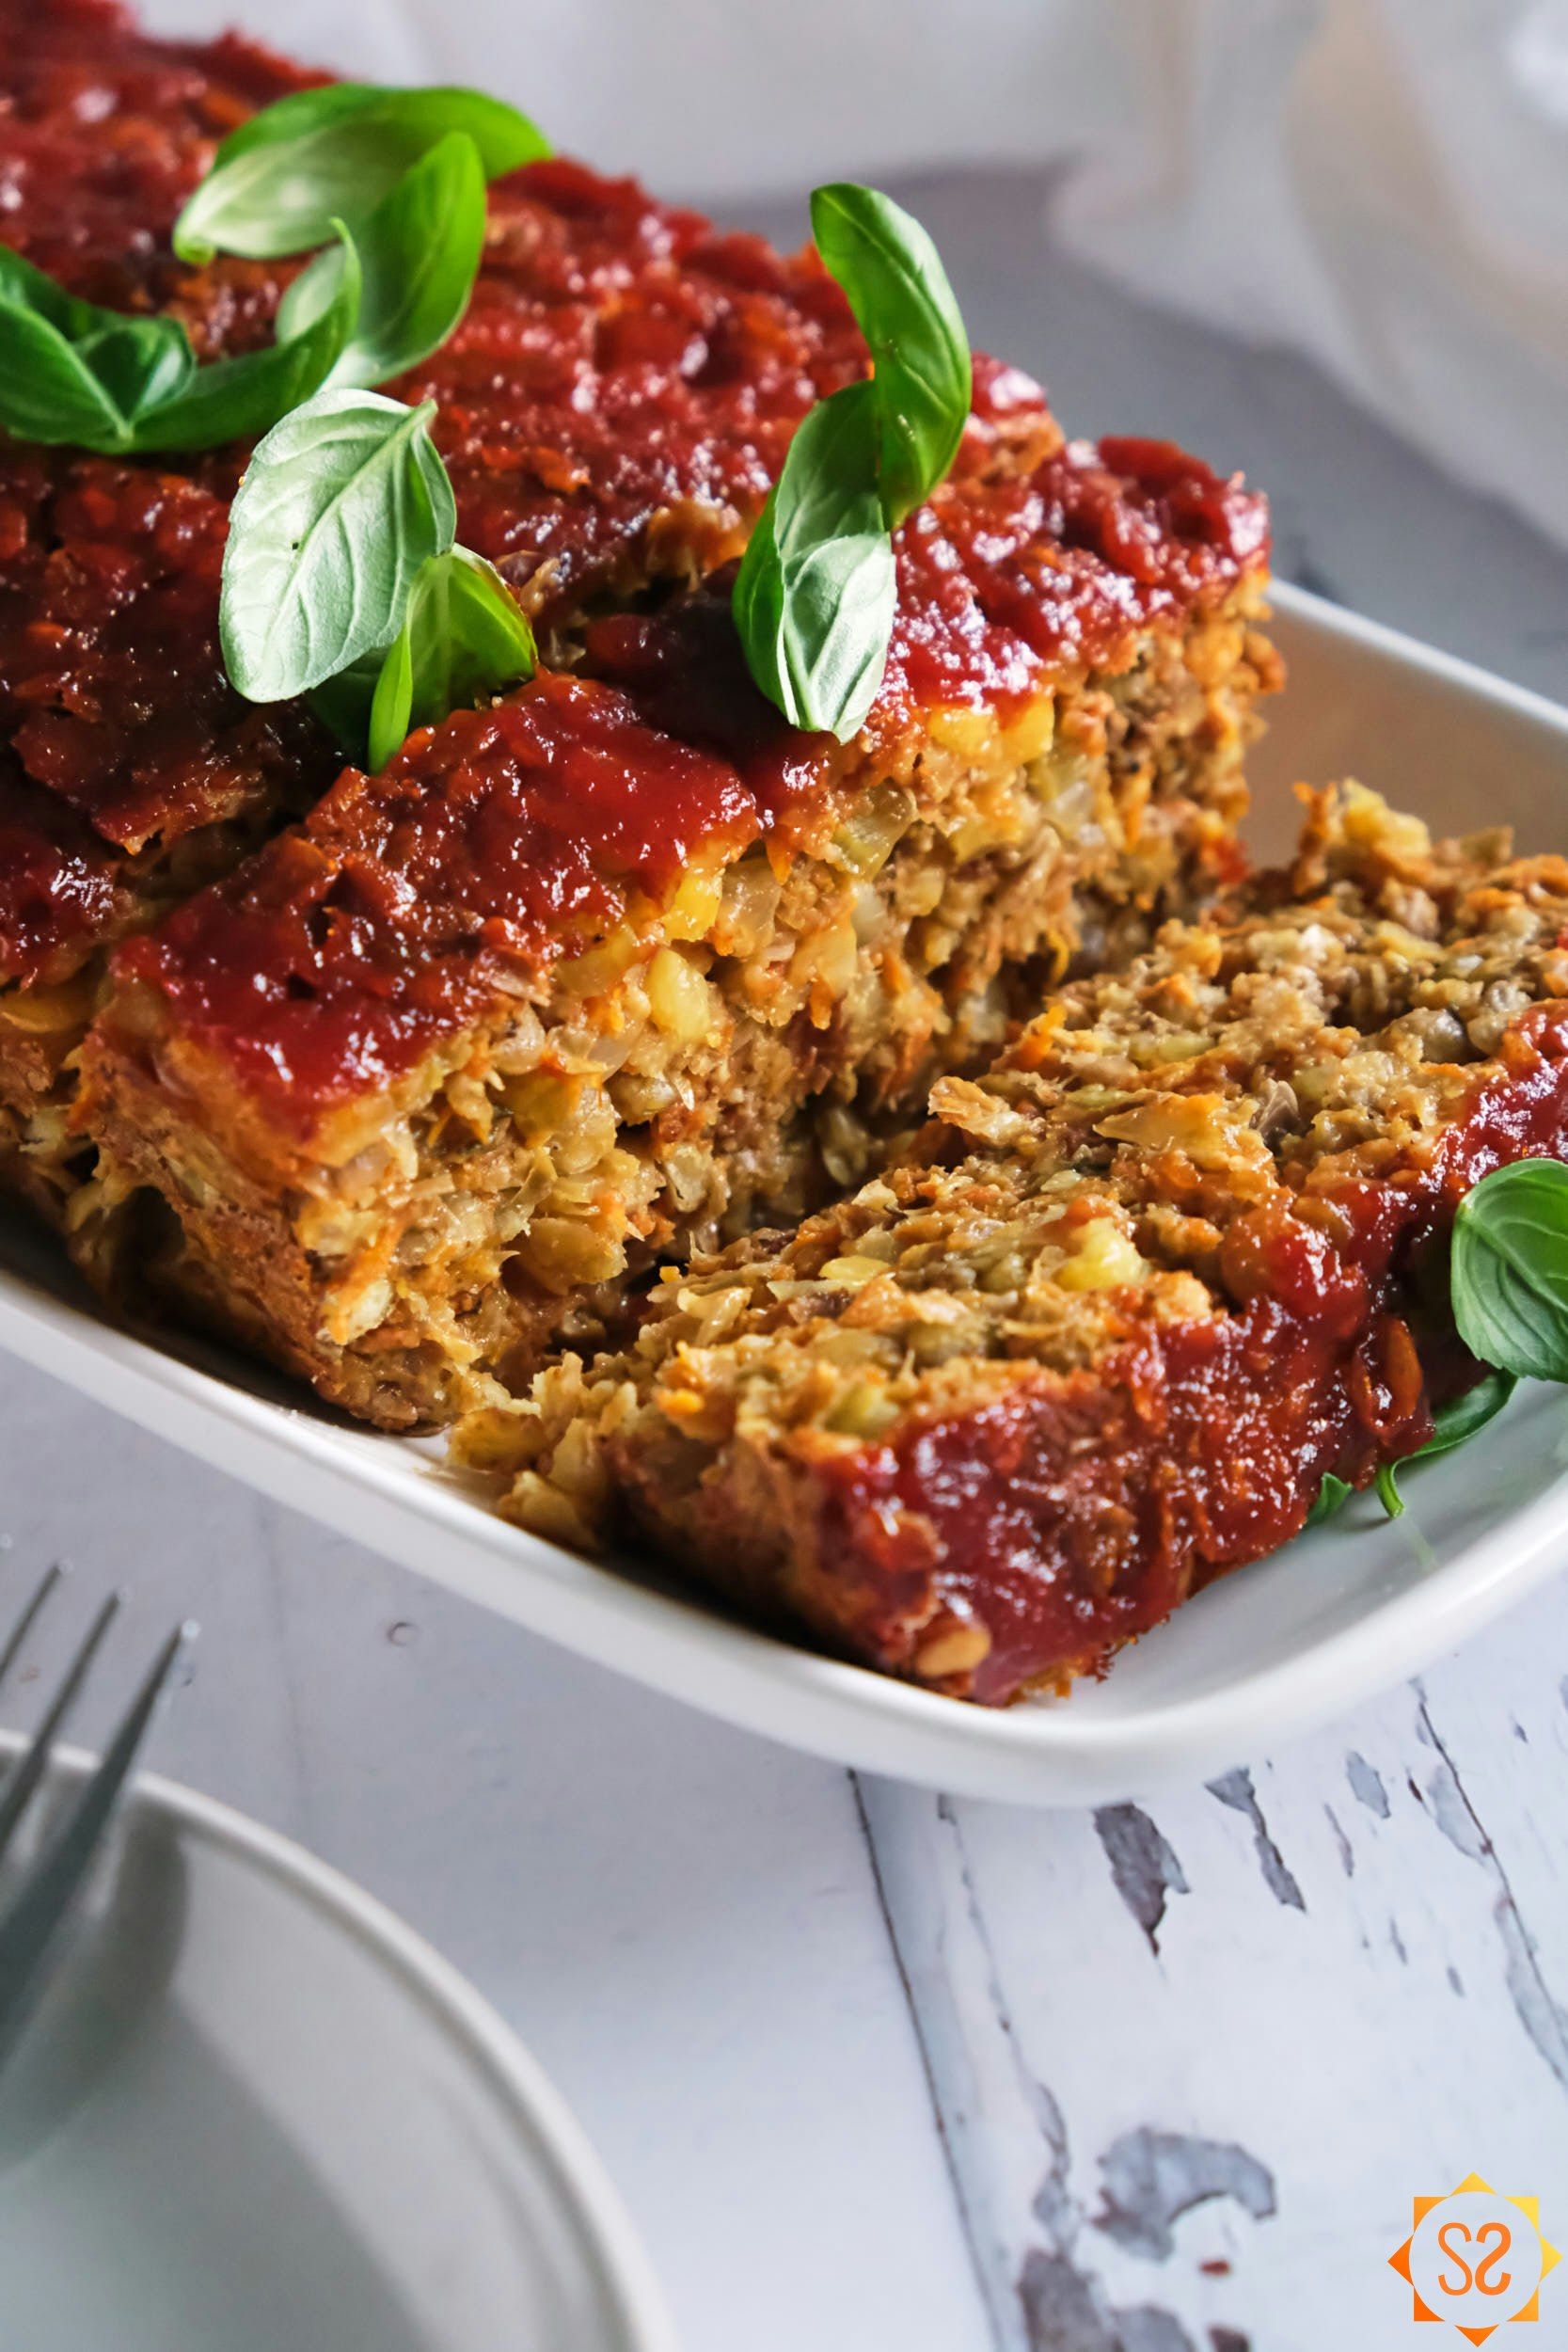 a close view of a sliced lentil loaf topped with basil, plates and forks in the foreground